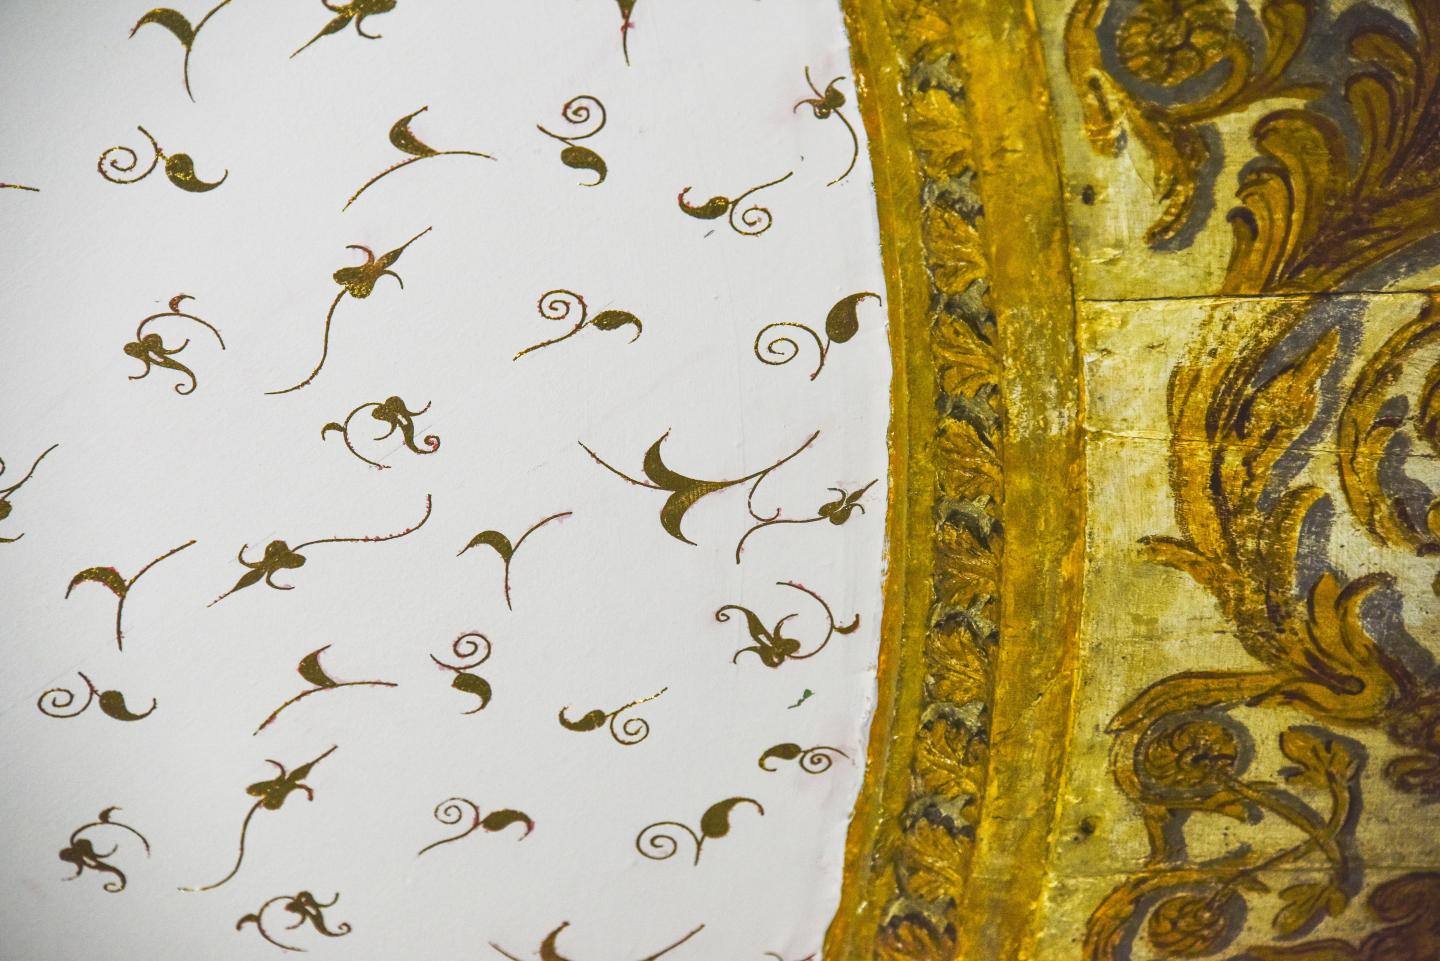 A close up view of the ceiling decoration in the Great Hall of the Queen's House. Contemporary gold leaf detailing on the left complements the historic plasterwork on the right